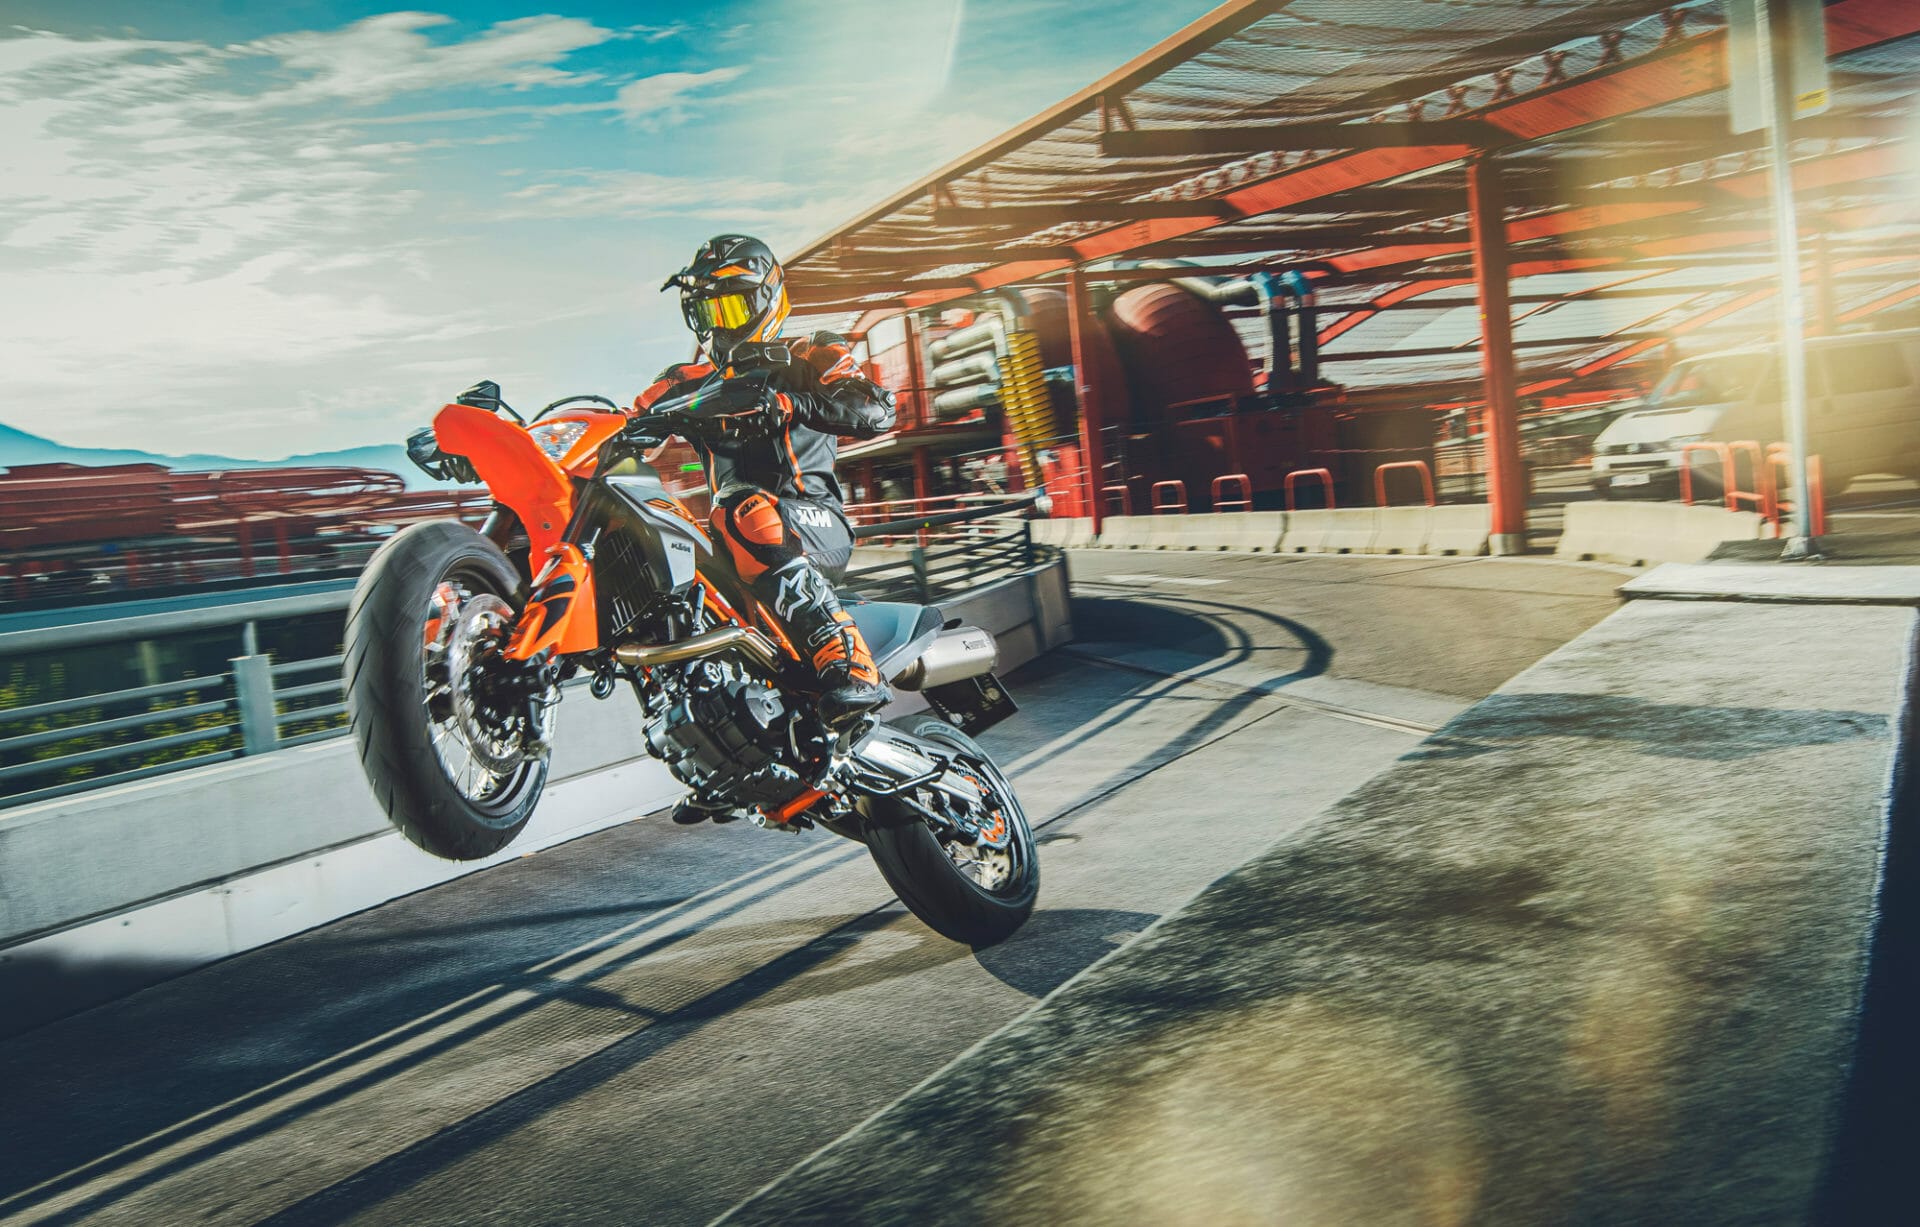 New KTM 690 Enduro R and KTM 690 SMC R for 2021
- also in the App MOTORCYCLE NEWS